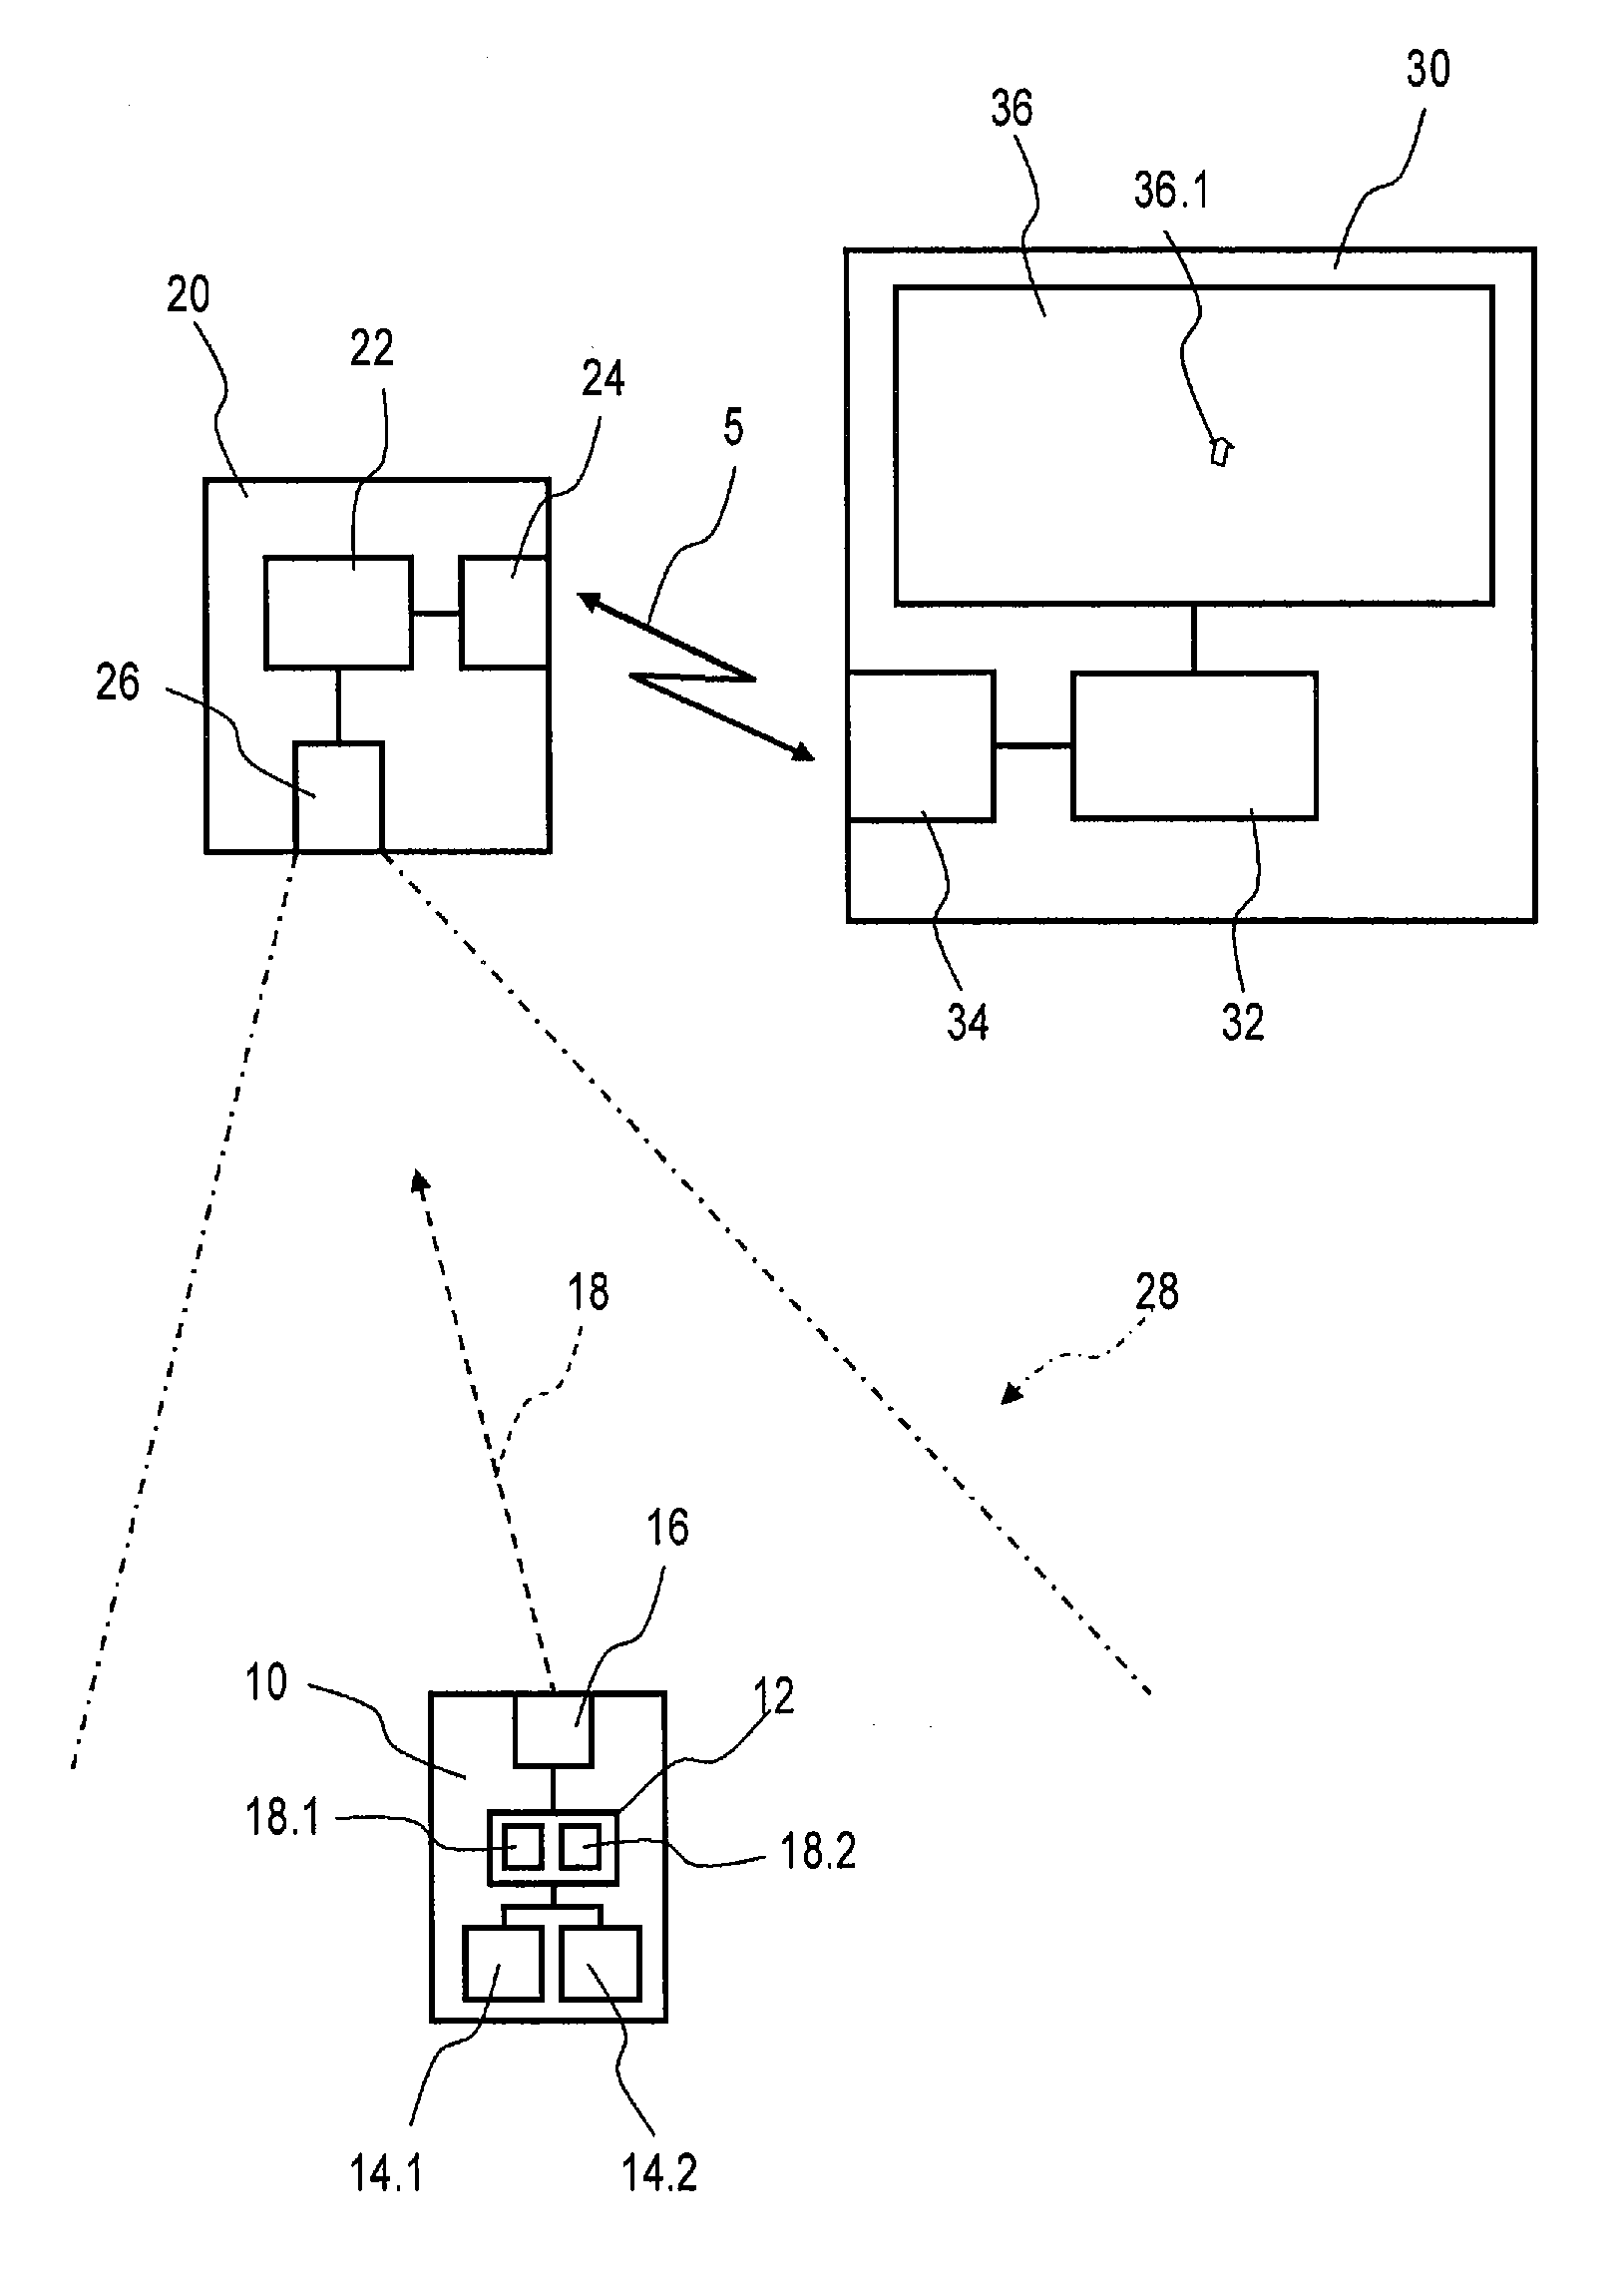 Remote controlling of mouse cursor functions of a computer device